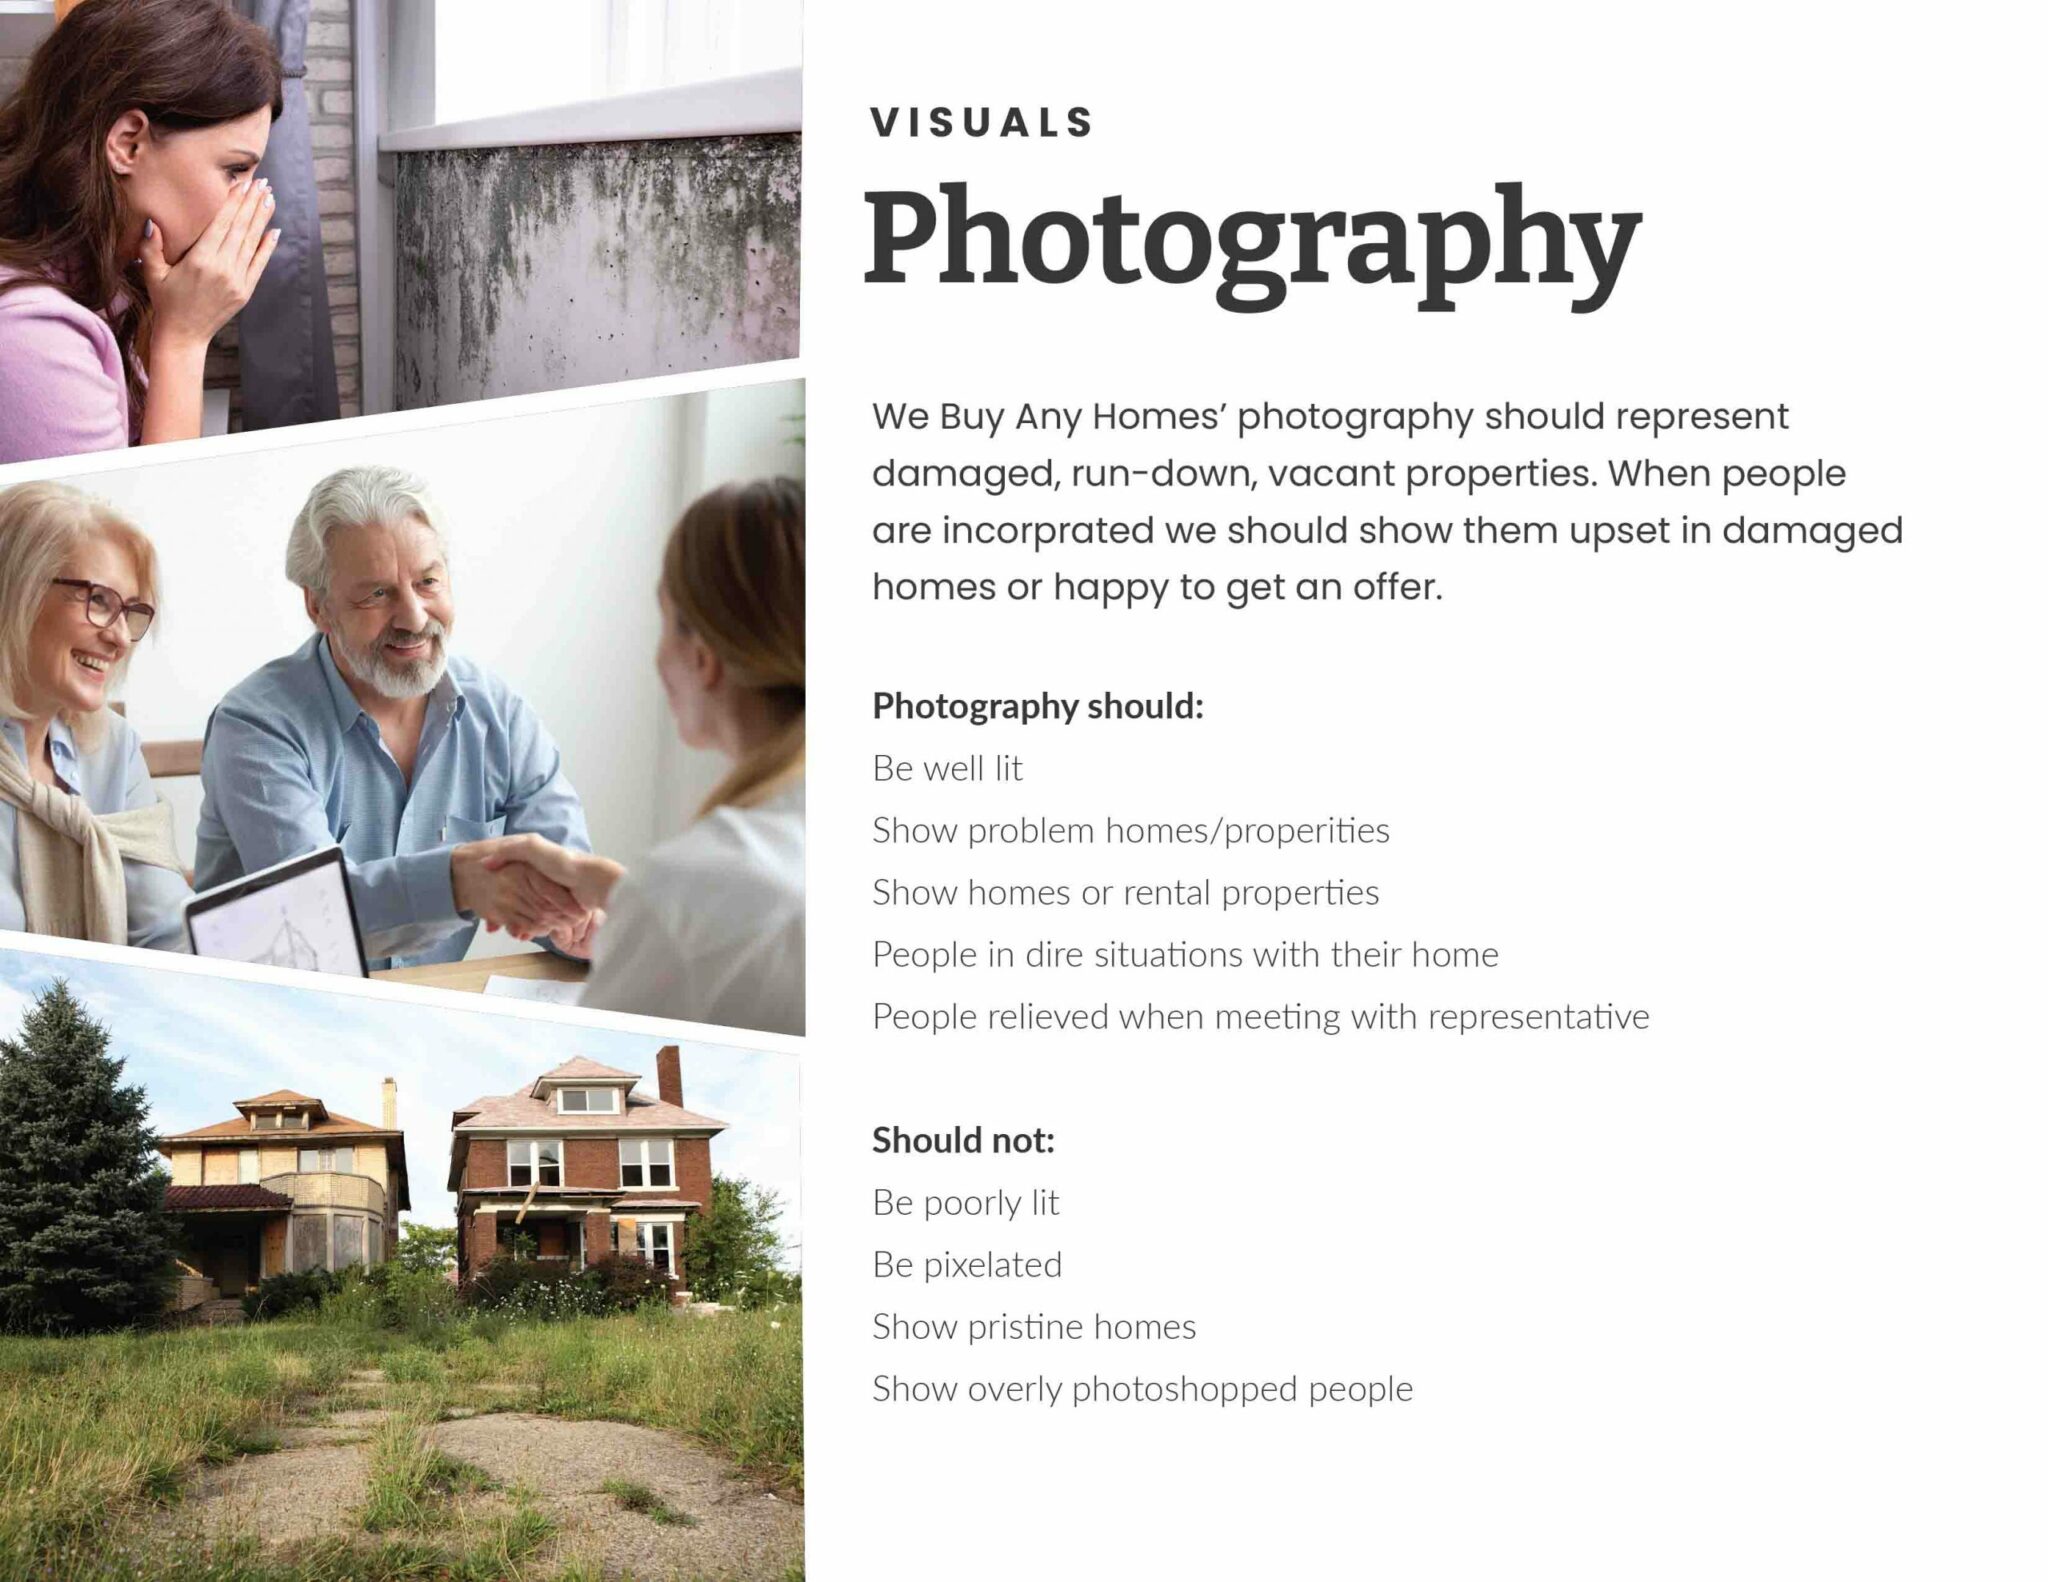 We Buy Any Homes Brand Guide - Photography